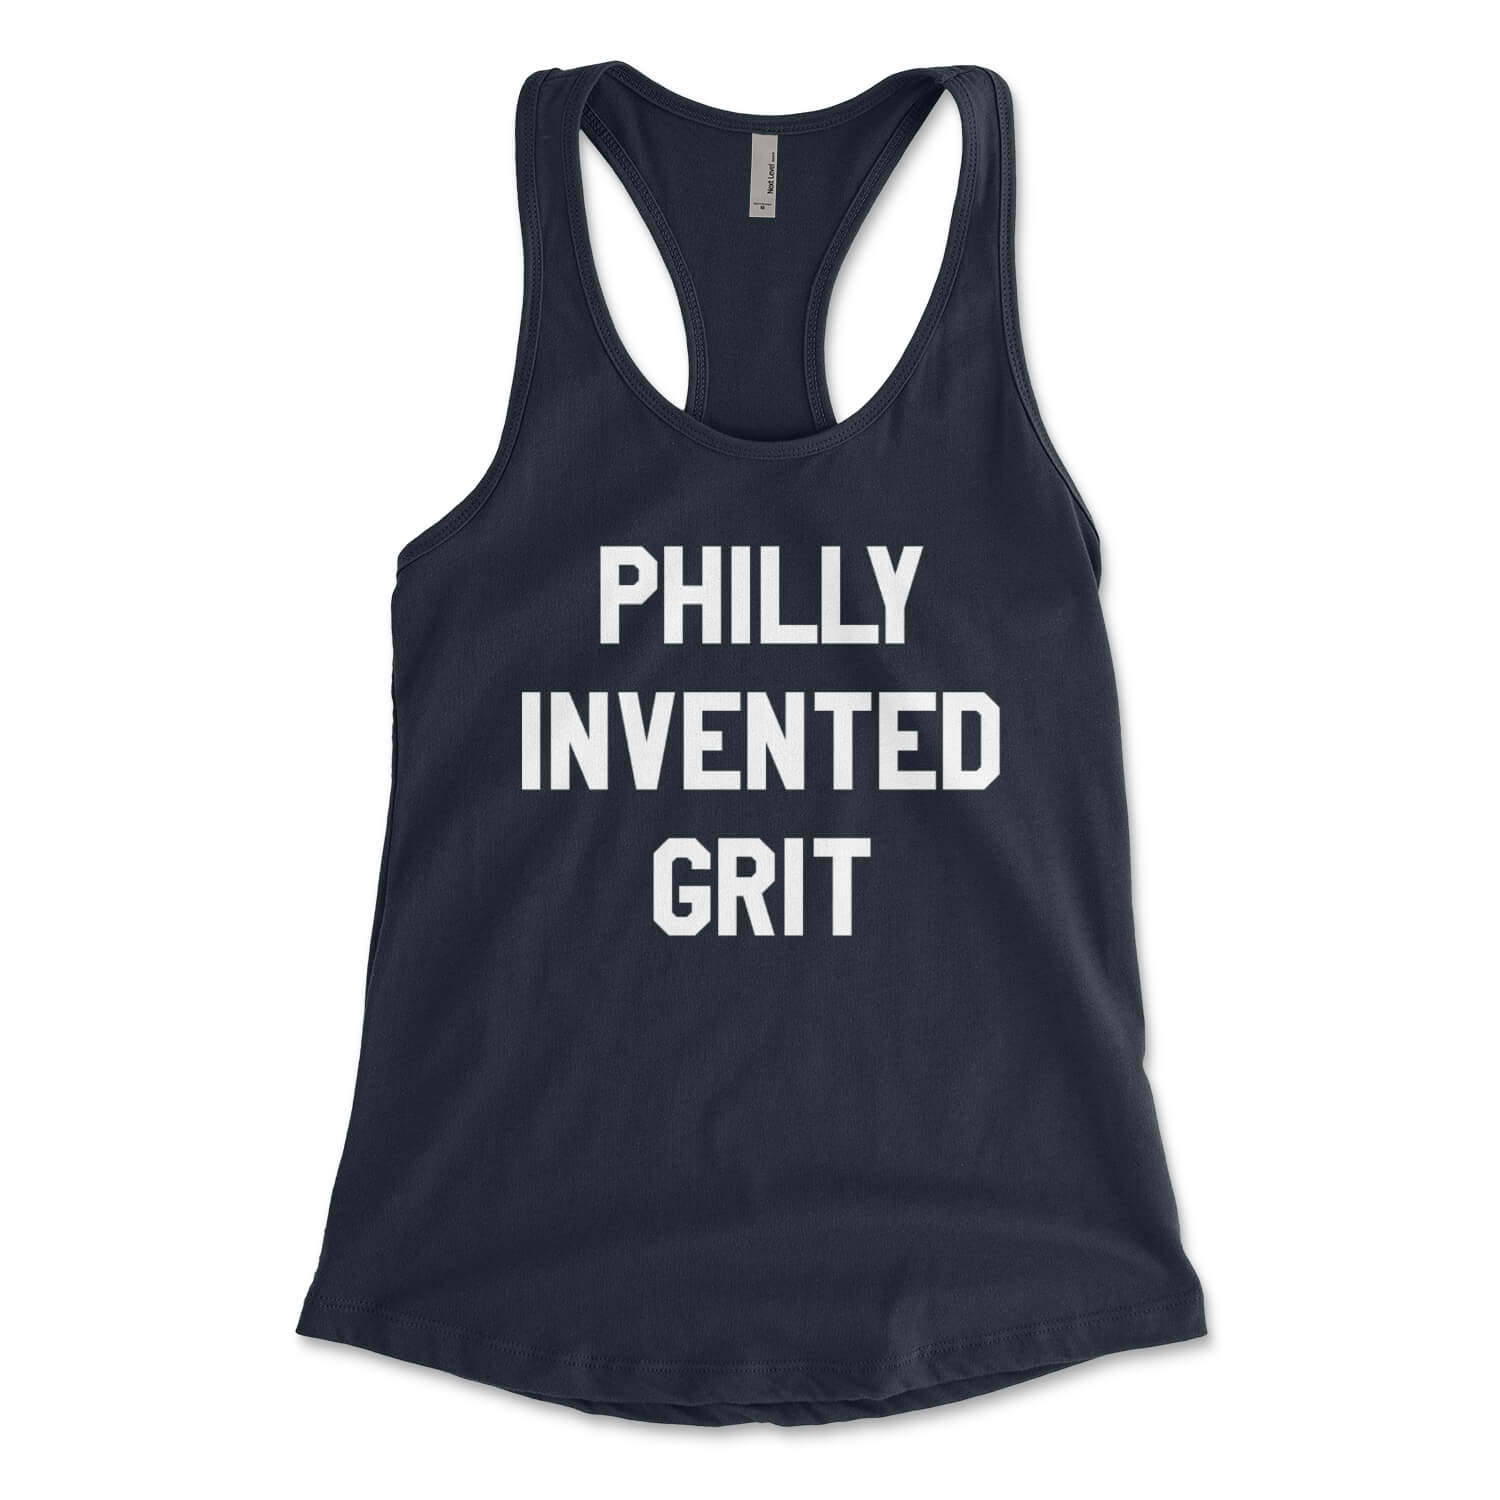 Philly invented grit midnight navy blue womens racerback tank top from Phillygoat